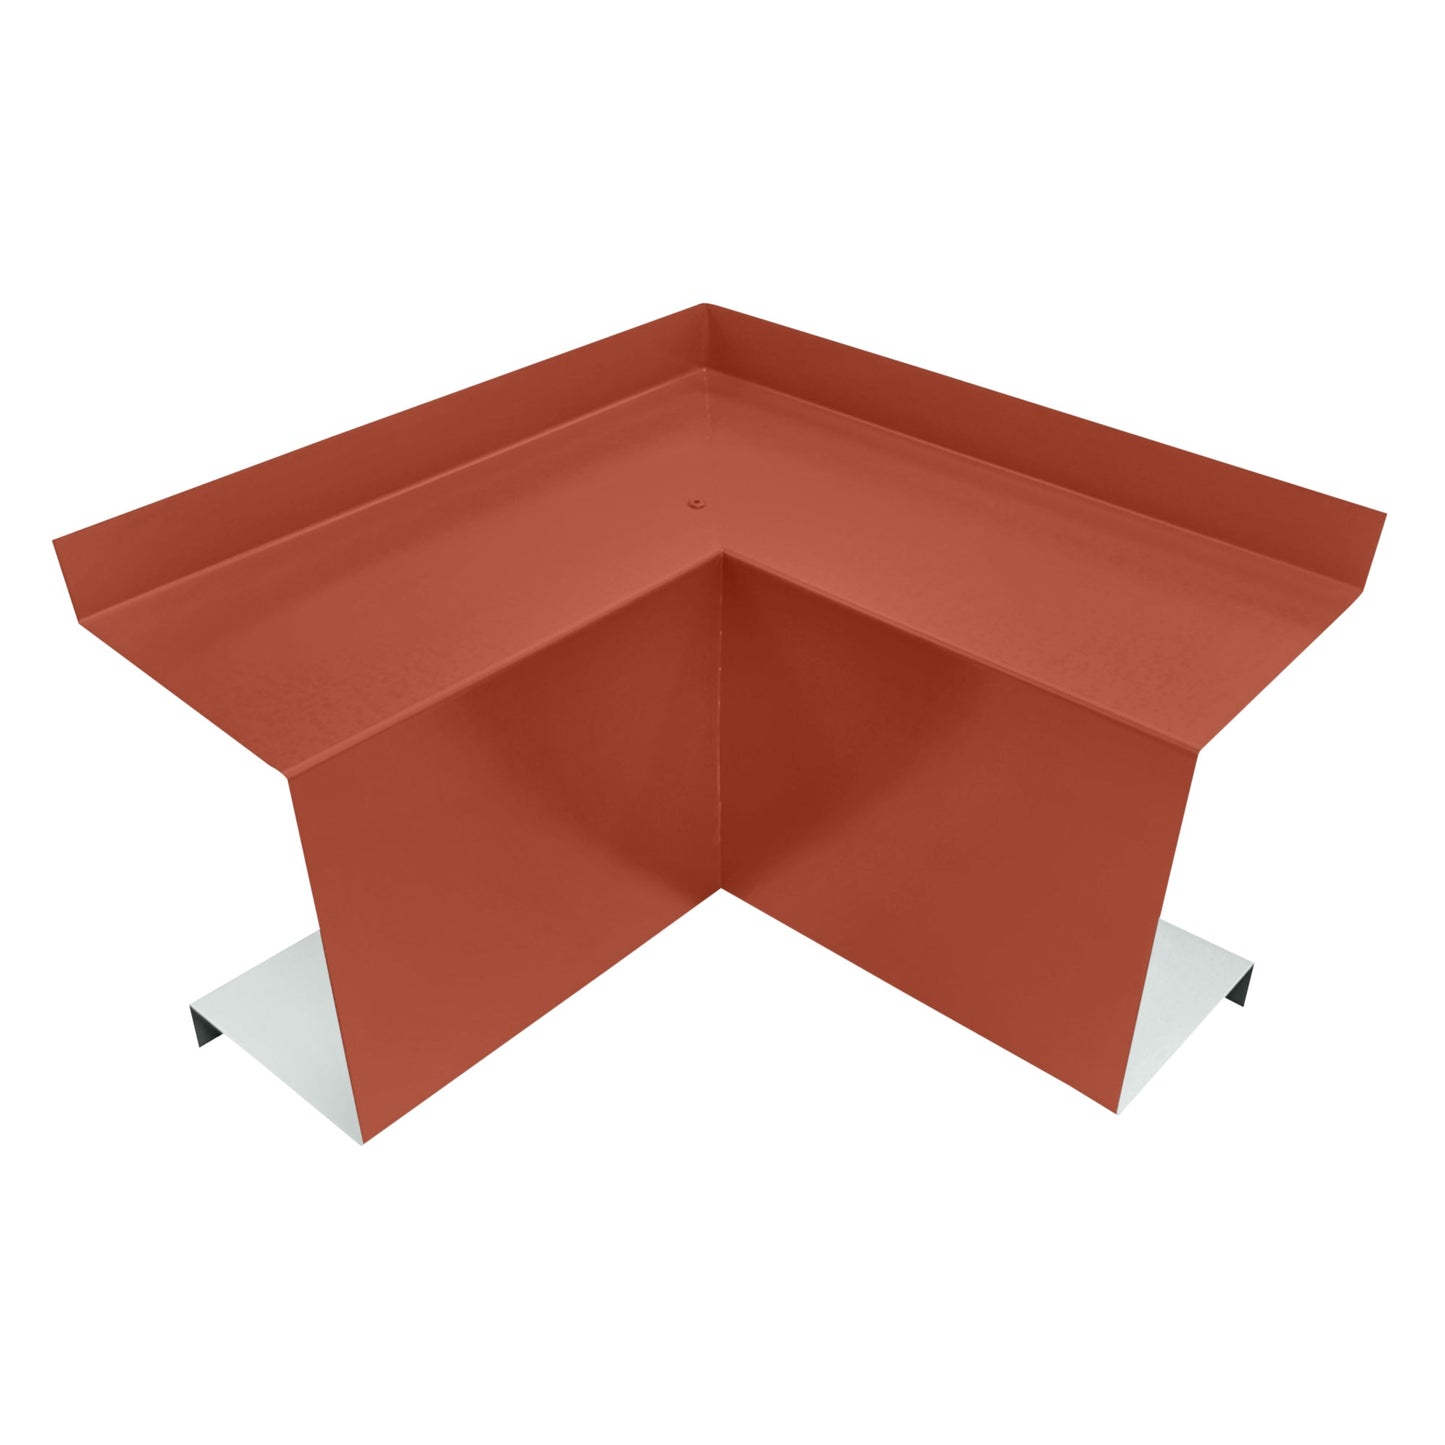 A red metal corner piece with a right-angle bend, typically used for roofing or HVAC installations. The piece features a folded edge for fitting against two perpendicular surfaces, providing support and sealing. Perfect for Perma Cover Residential Series - Line Set Cover Inside Corner Elbows - Premium Quality, the background is plain white.